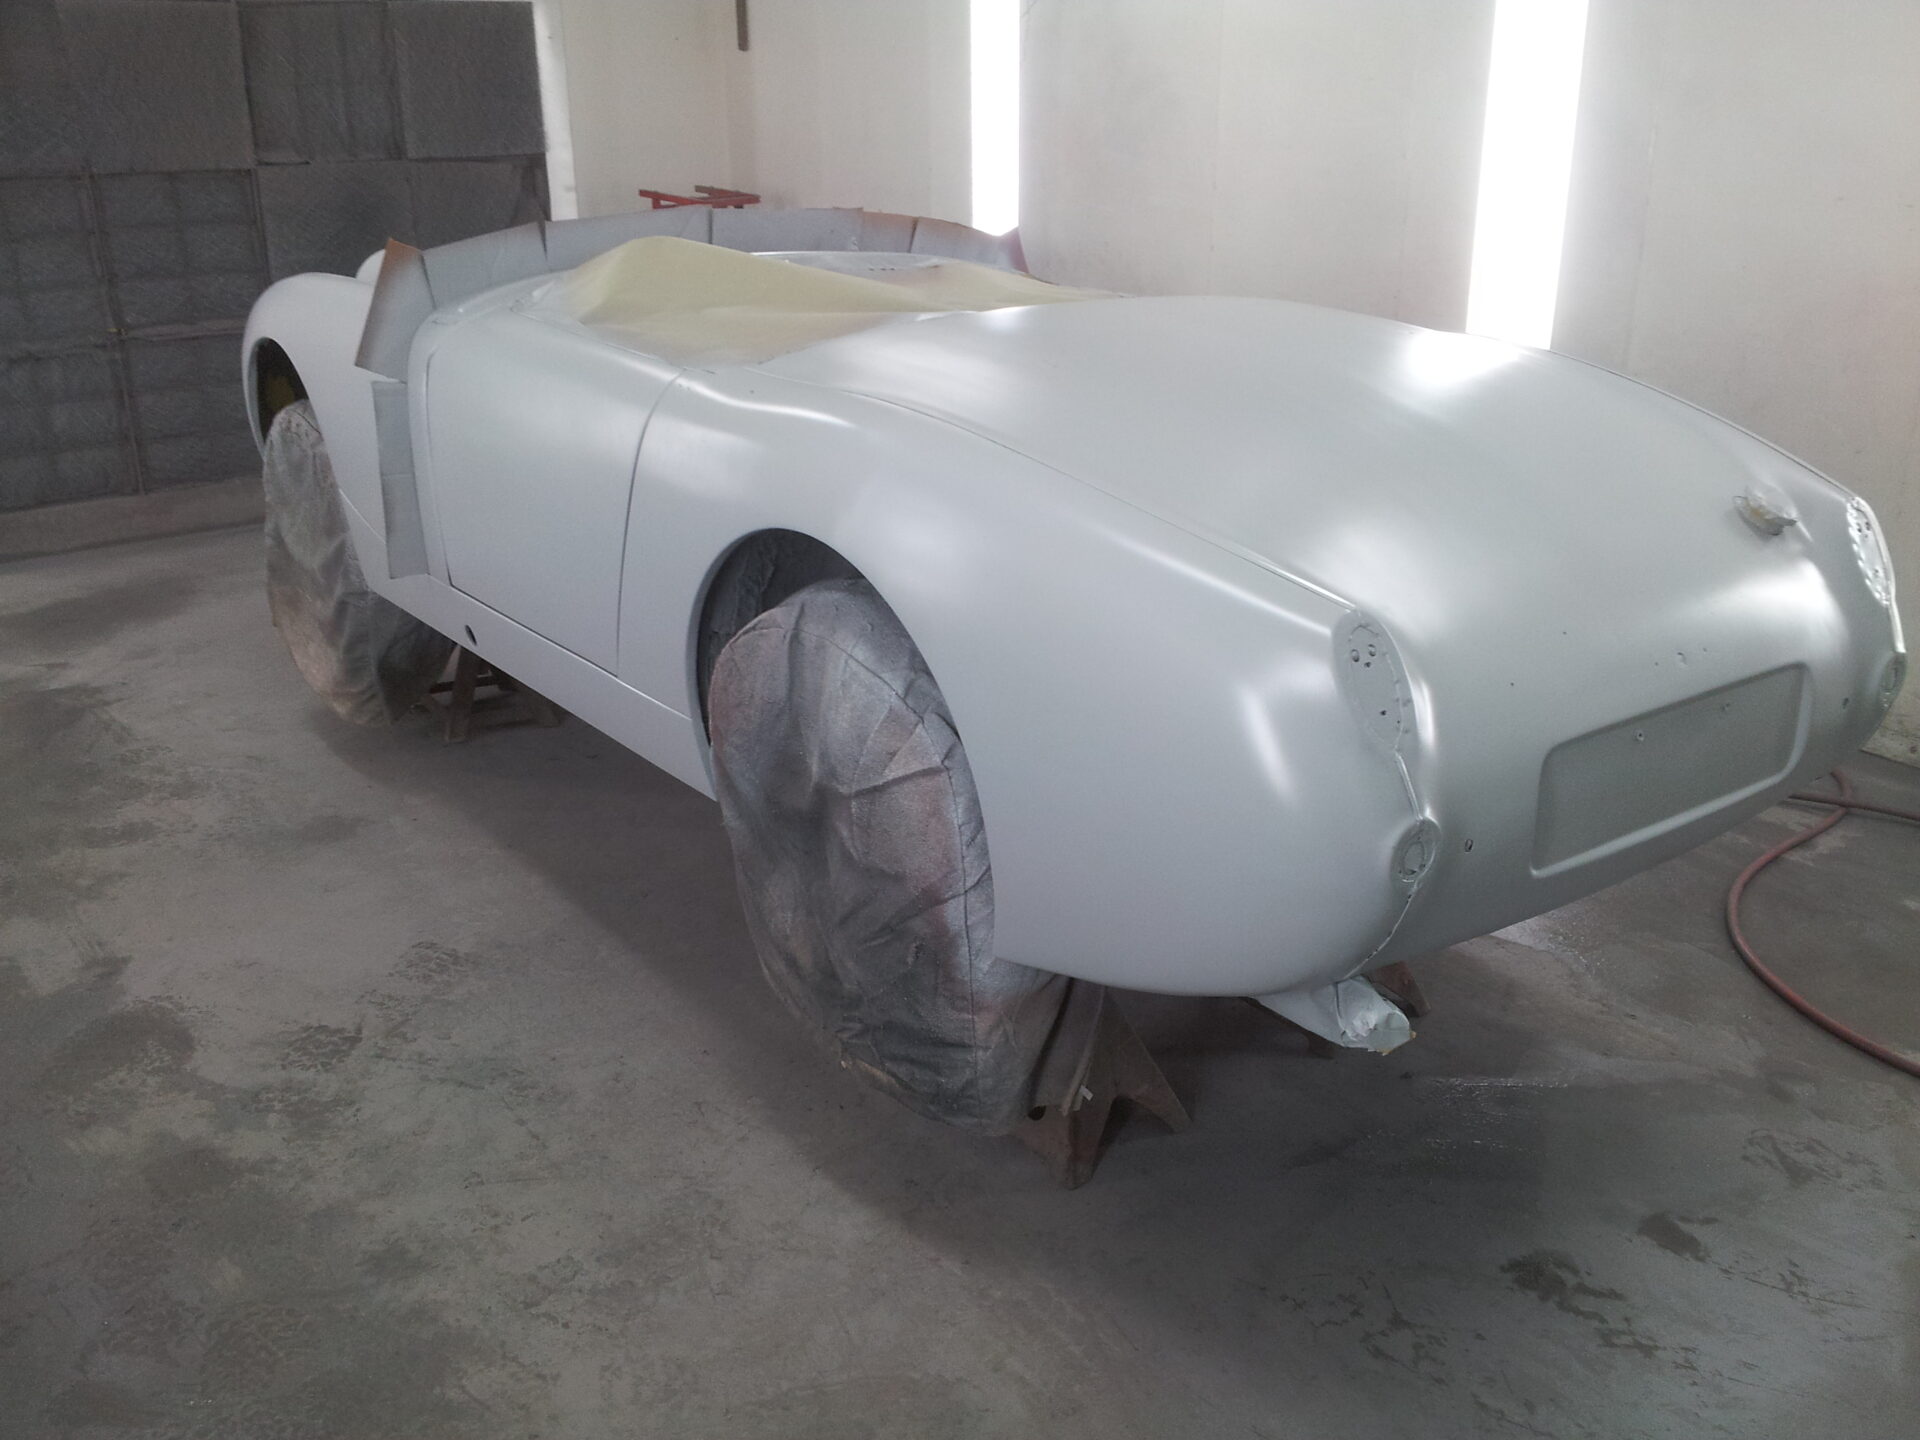 A 1959 Austin Healey coated for paint